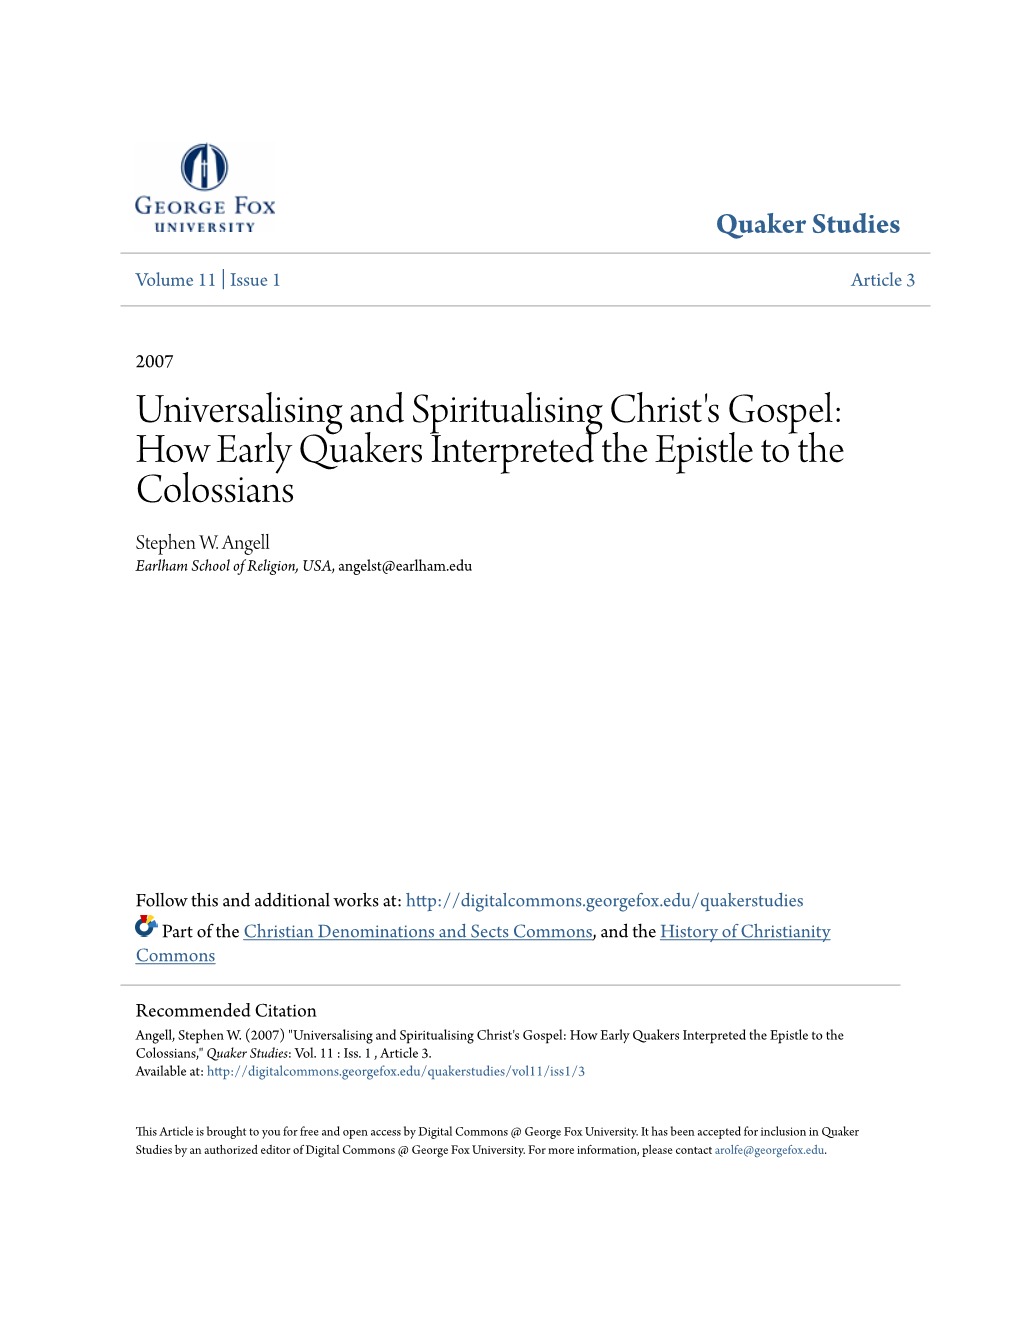 Universalising and Spiritualising Christ's Gospel: How Early Quakers Interpreted the Epistle to the Colossians Stephen W